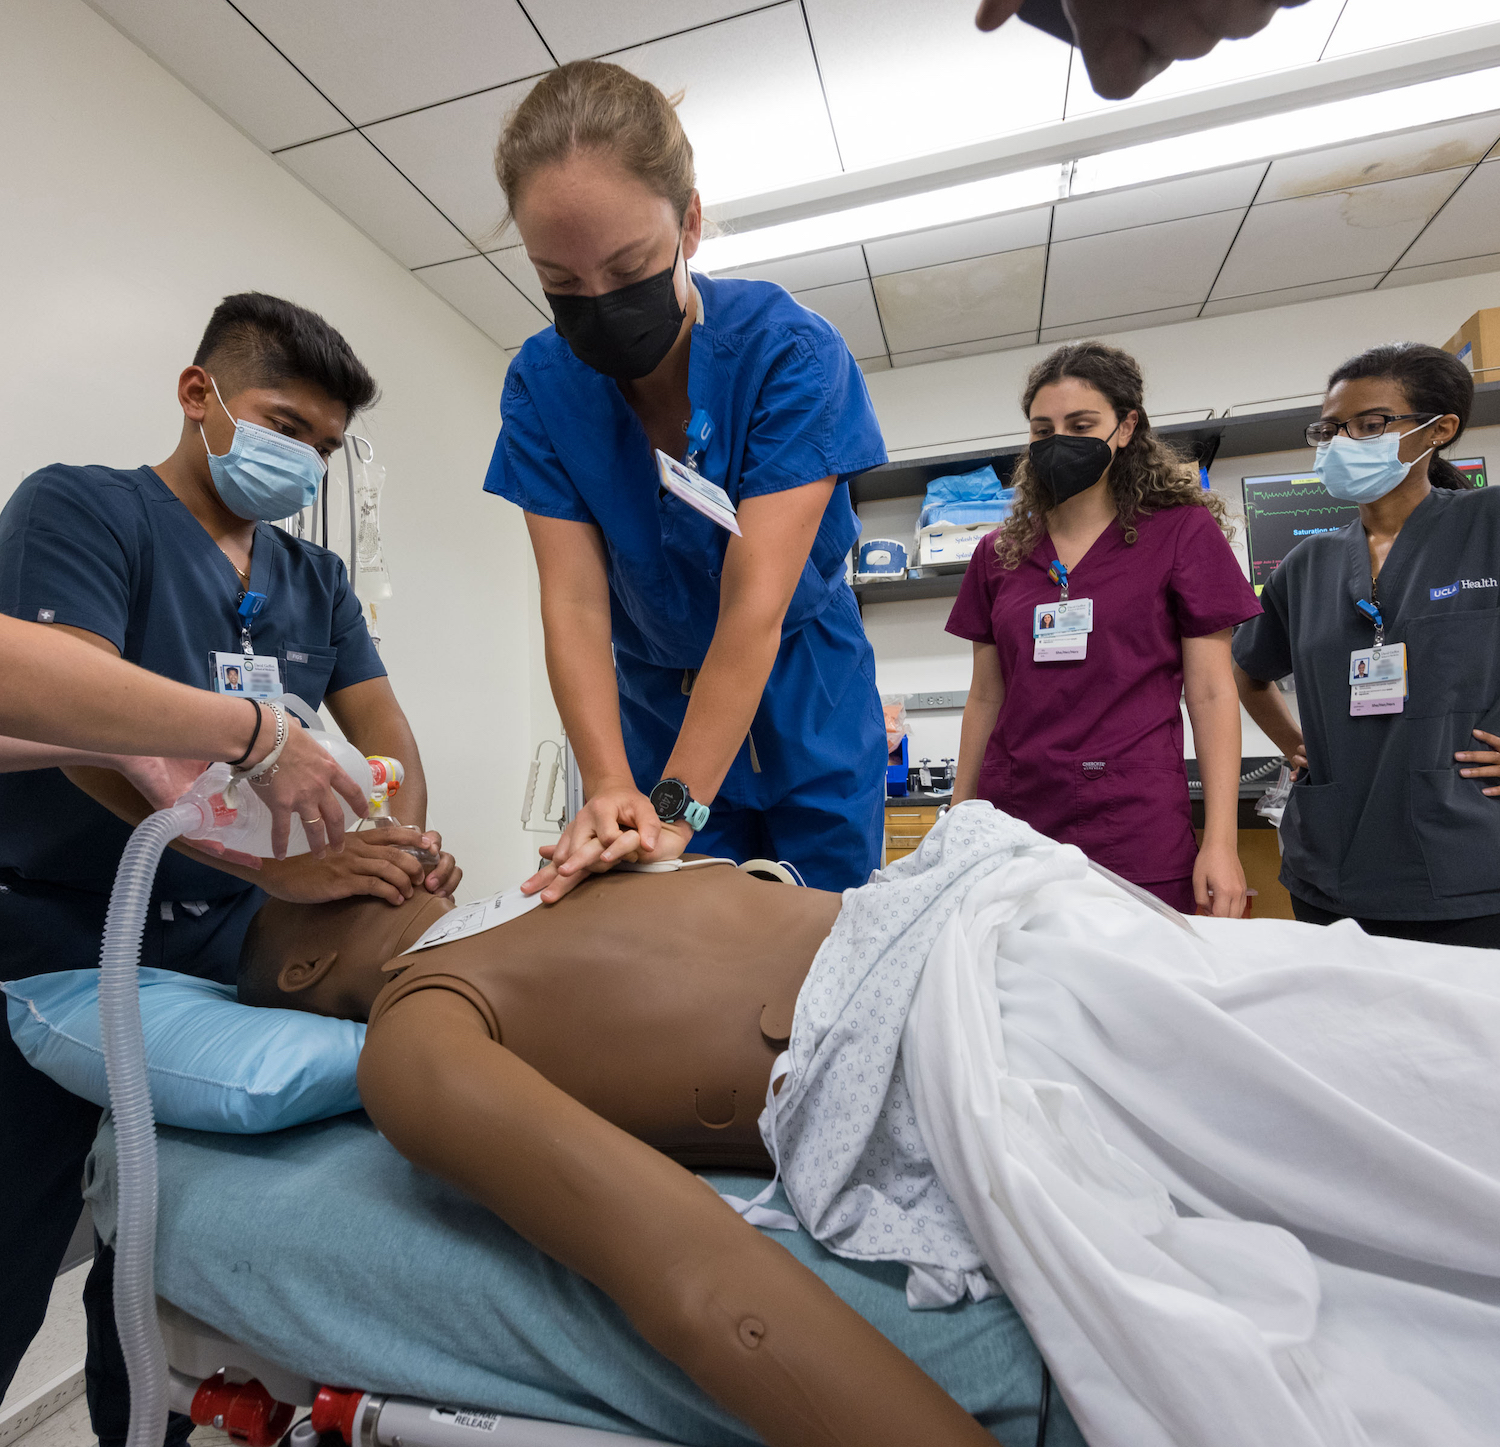 Students working in a simulation center